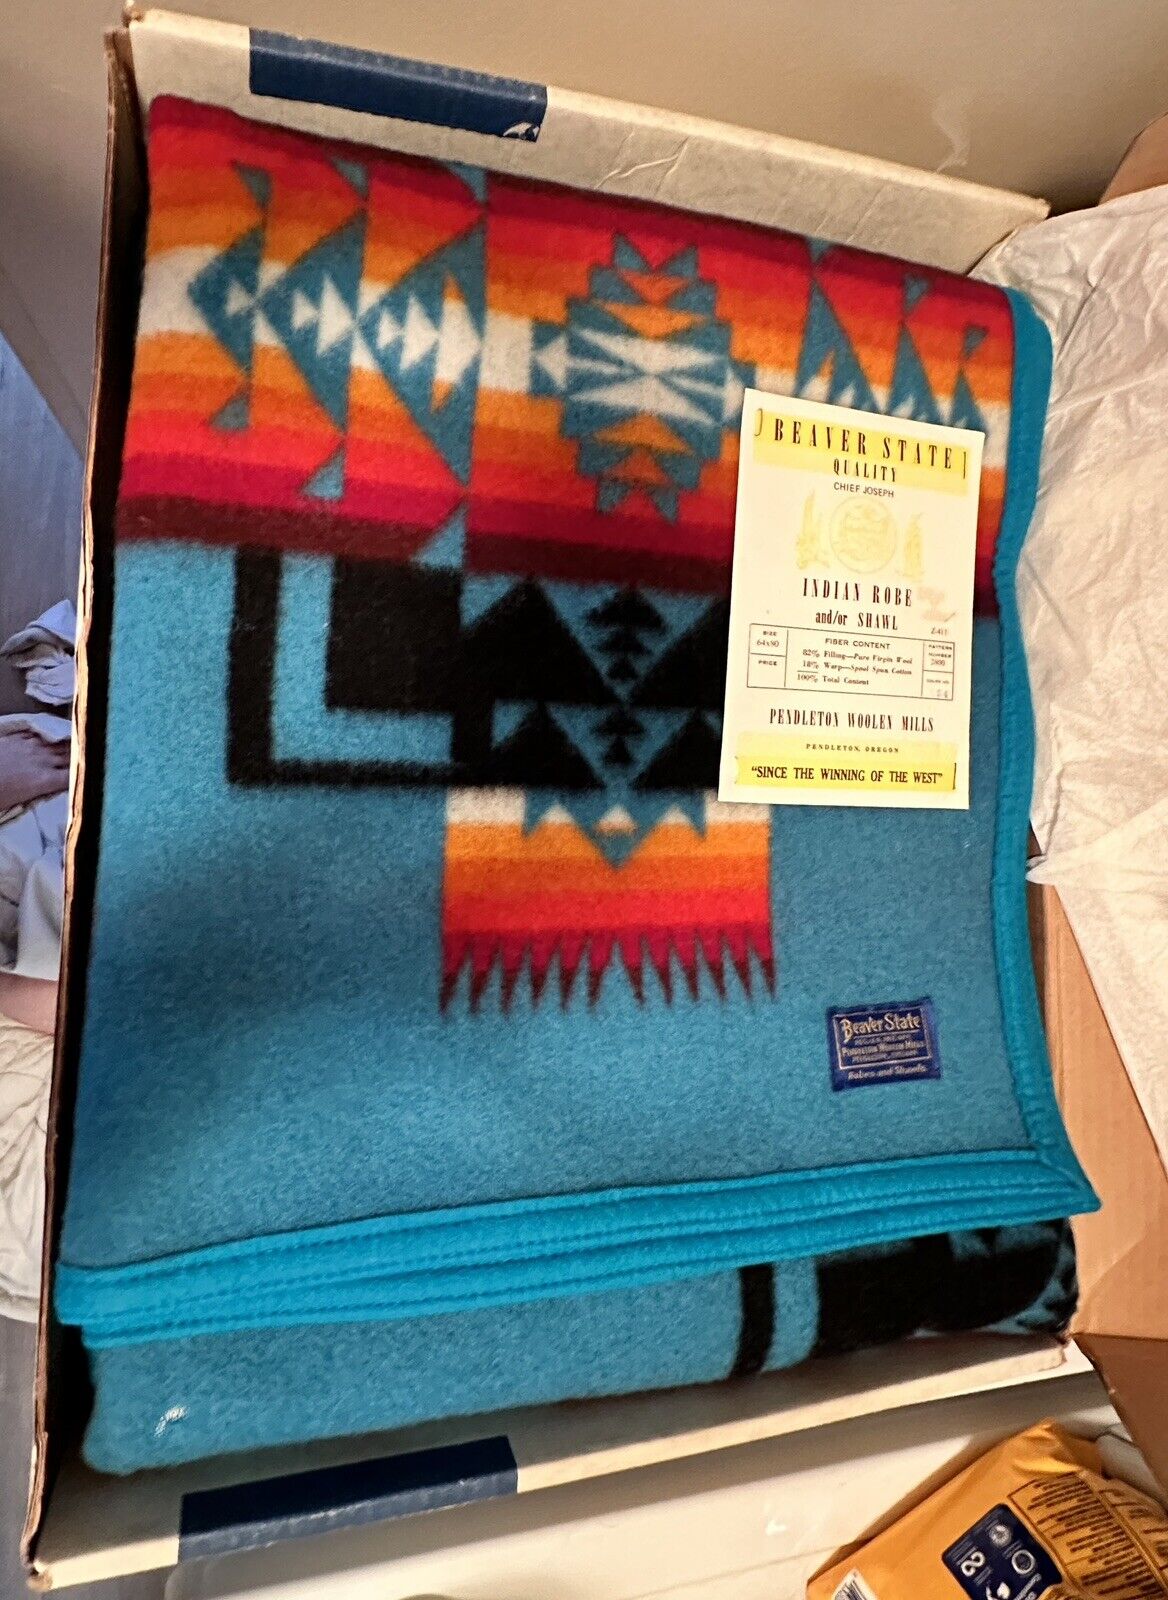 Pendleton Beaver State Chief Joseph Turquoise 64”x80” In Box With Tag